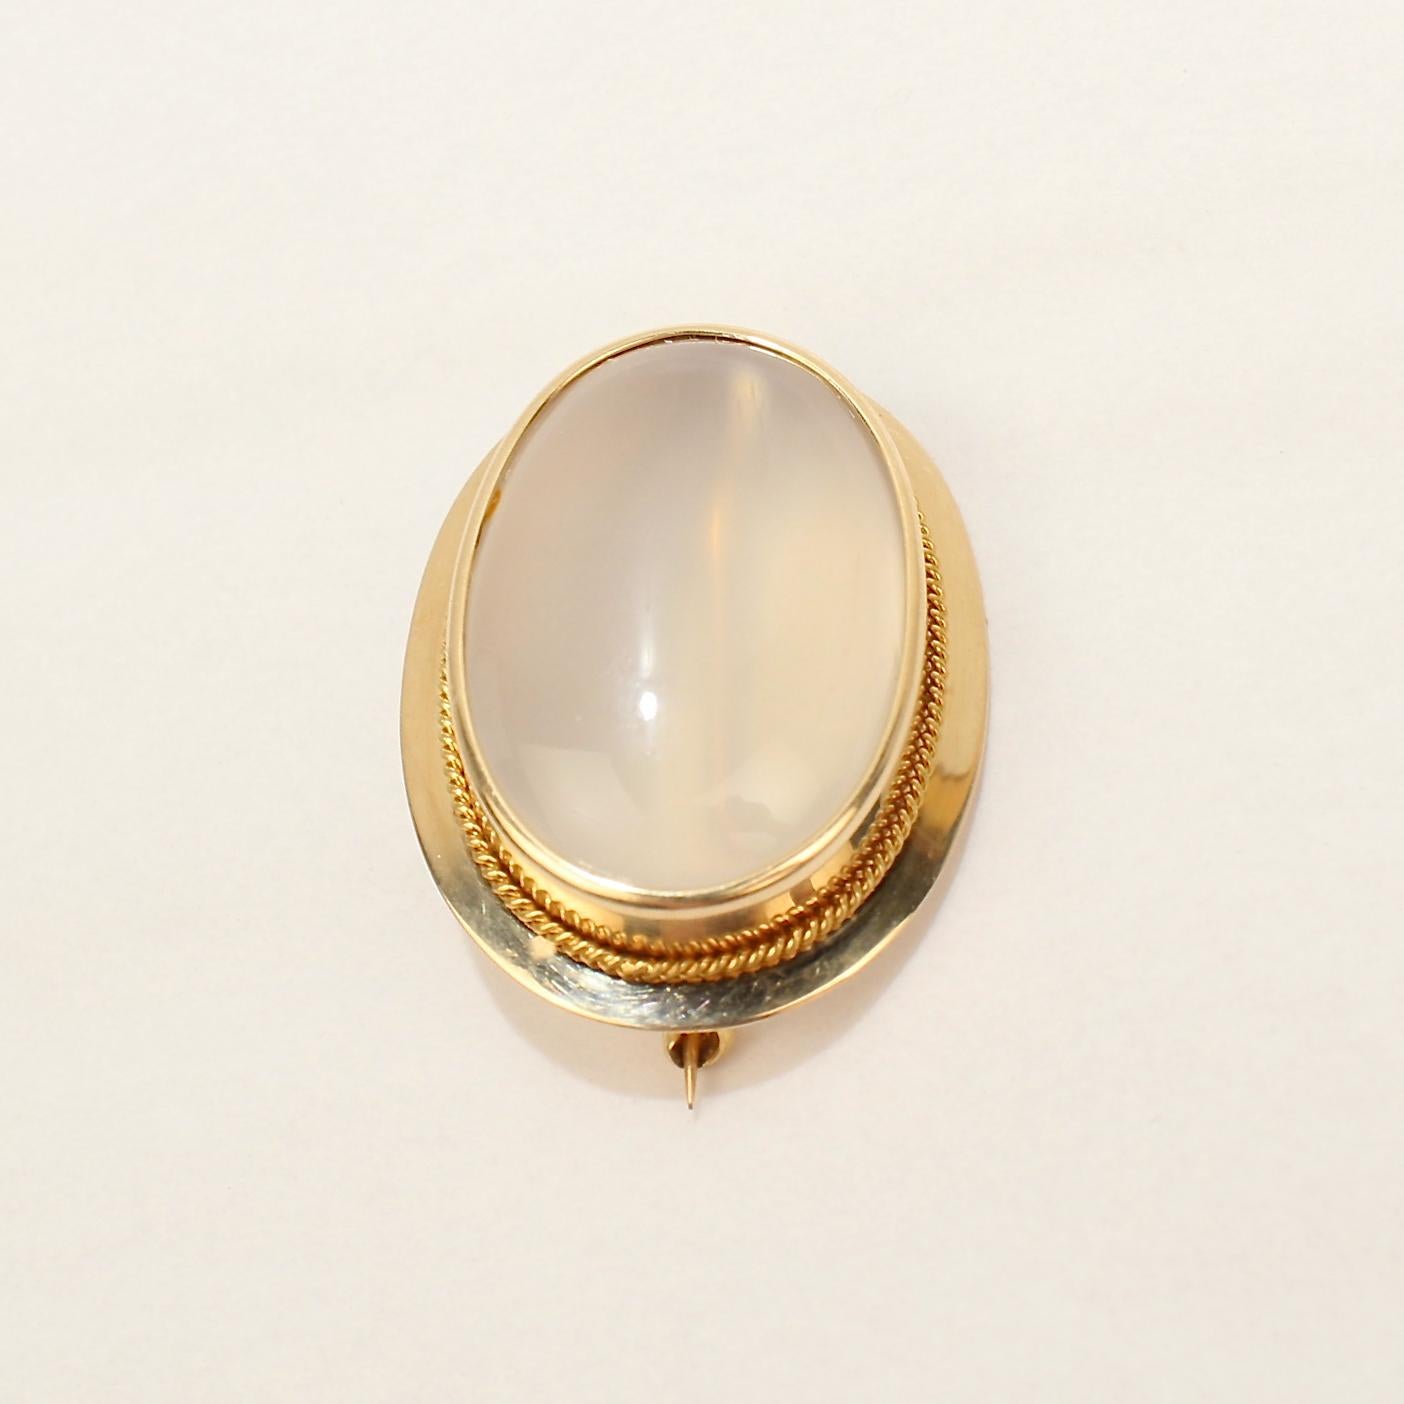 Edwardian Fine Retro 10 Karat Gold and Moonstone Cabochon Brooch or Pin For Sale